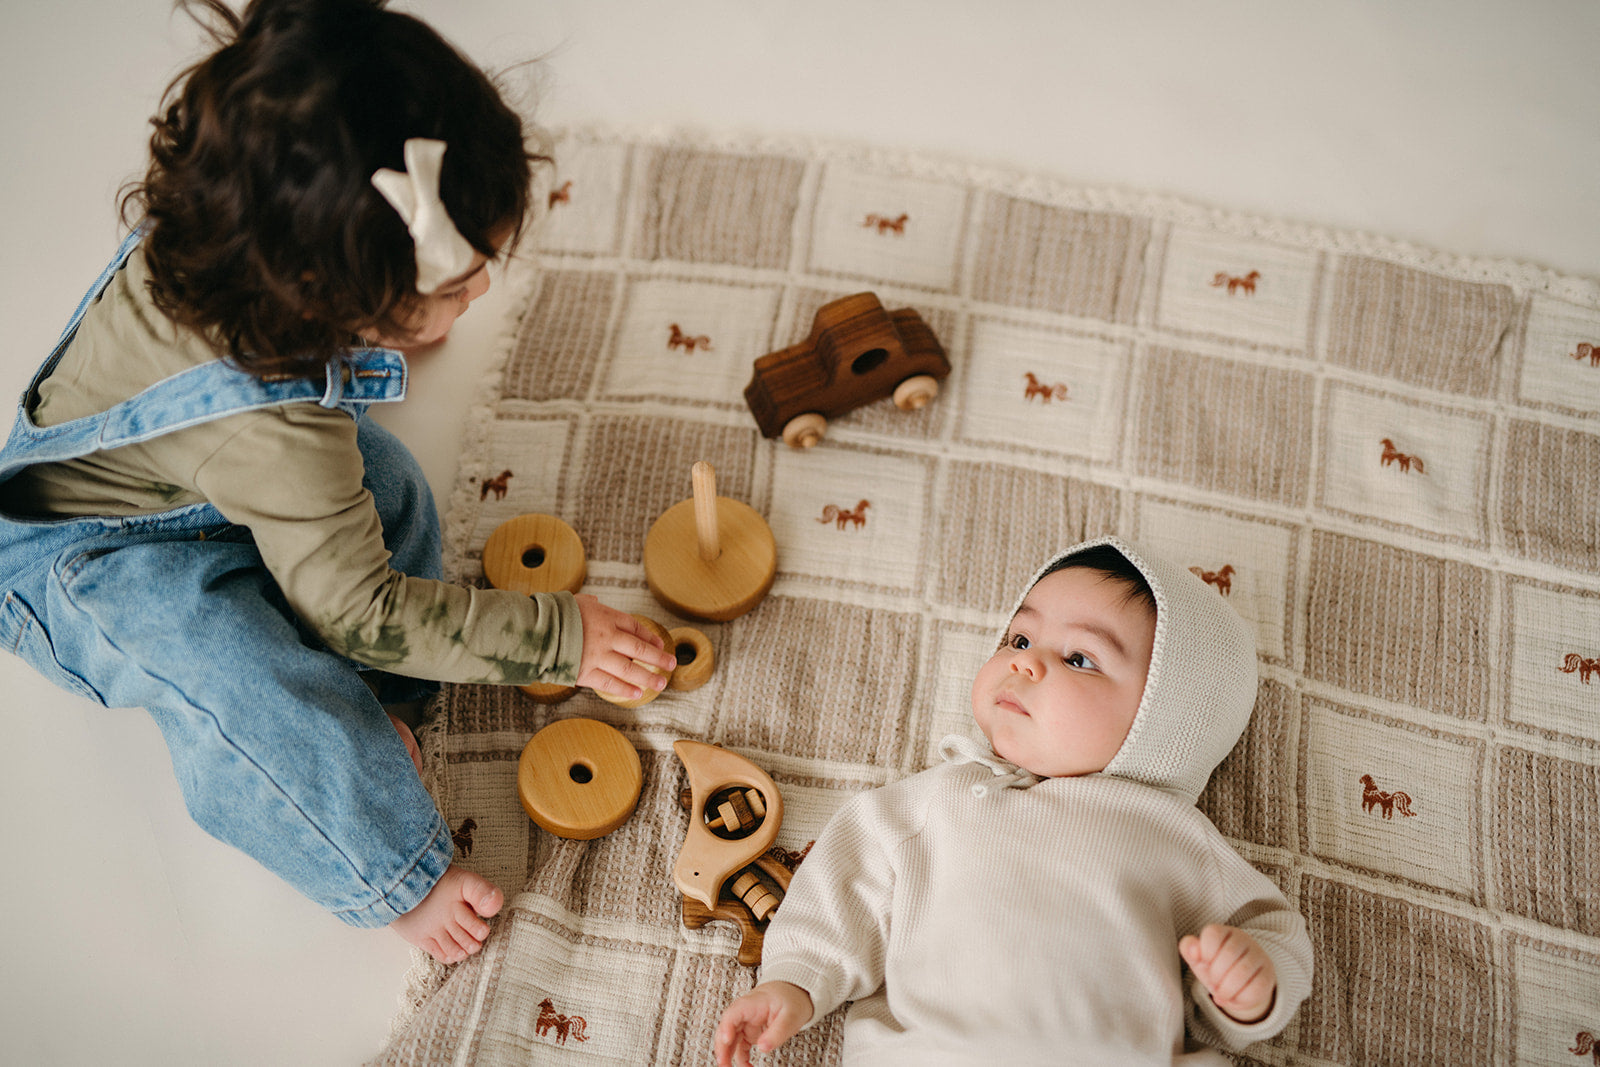 Children Playing with wooden toys on a neutral blanket